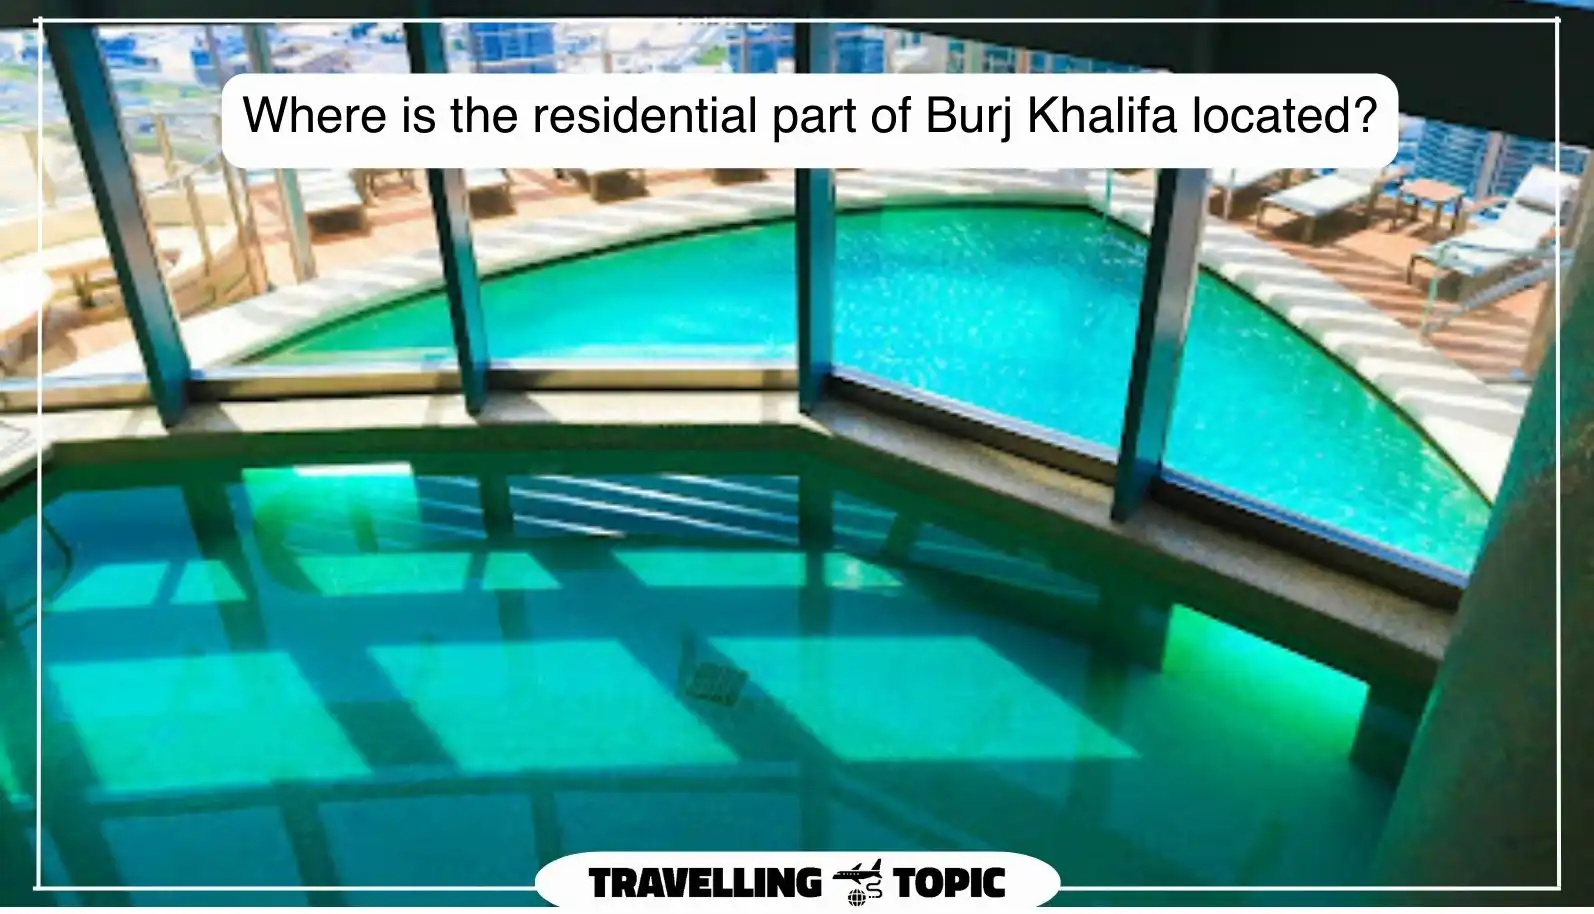 Where is the residential part of Burj Khalifa located